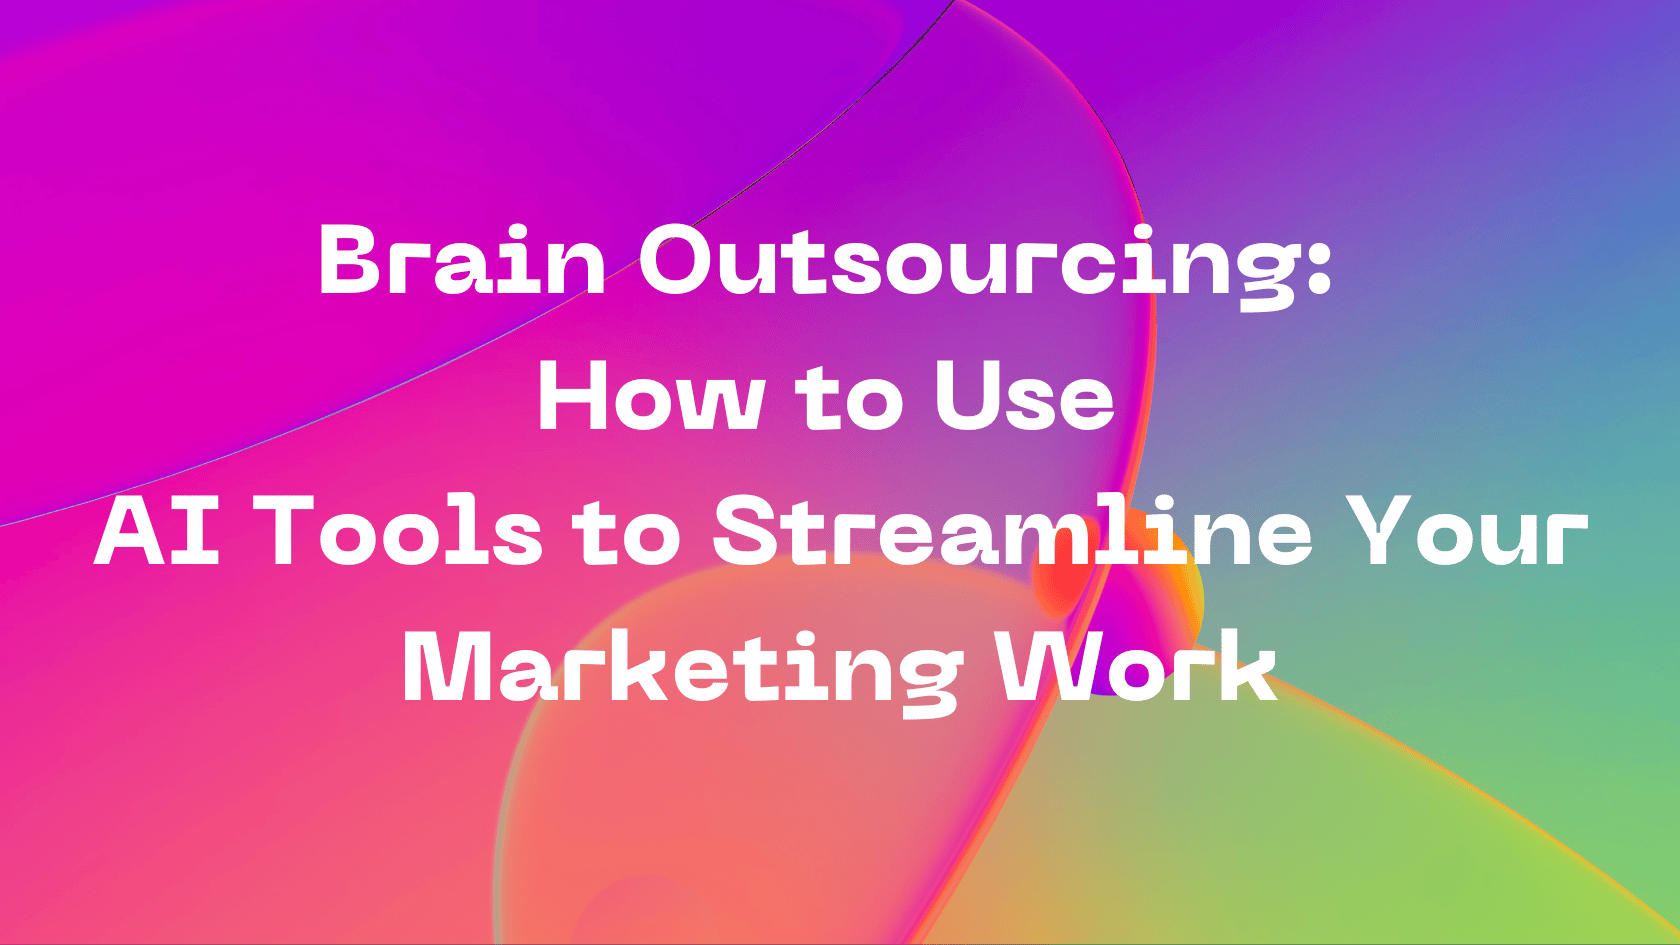 Brain Outsourcing: How to Use AI Tools to Streamline Your Marketing Work